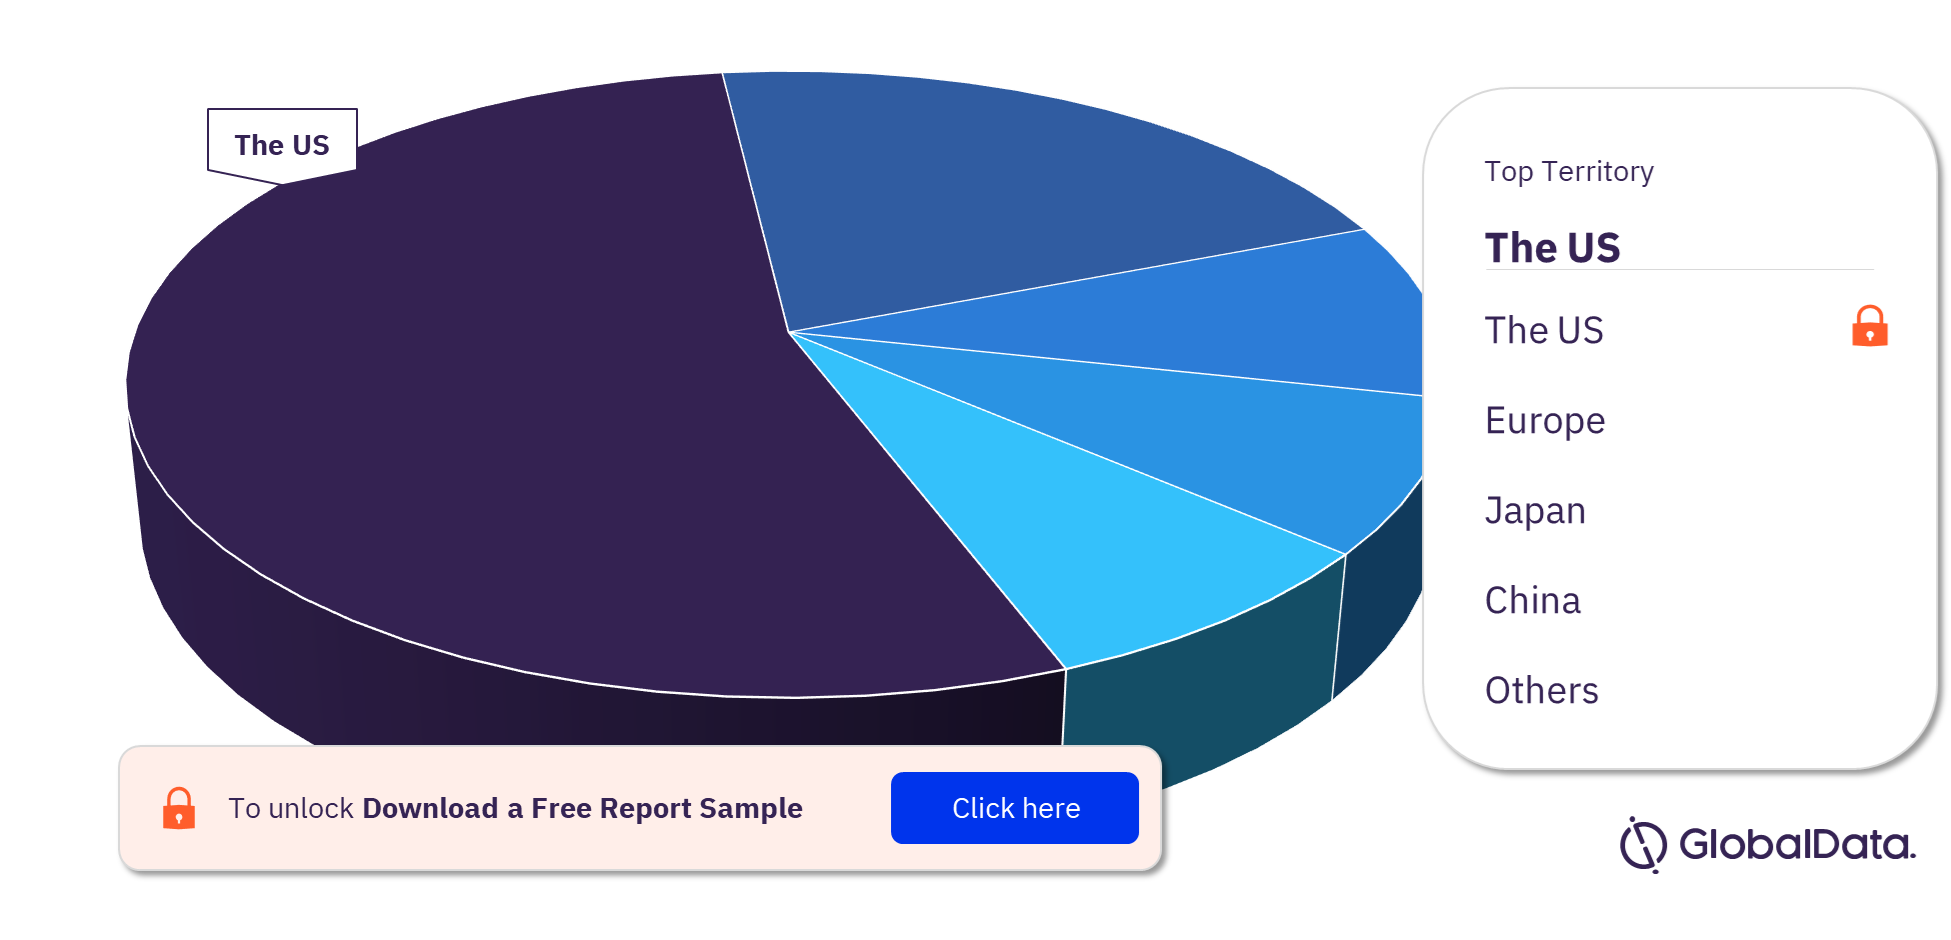 Abdominal Aortic Stent Grafts Pipeline Products Market Analysis, by Territories, 2023 (%)